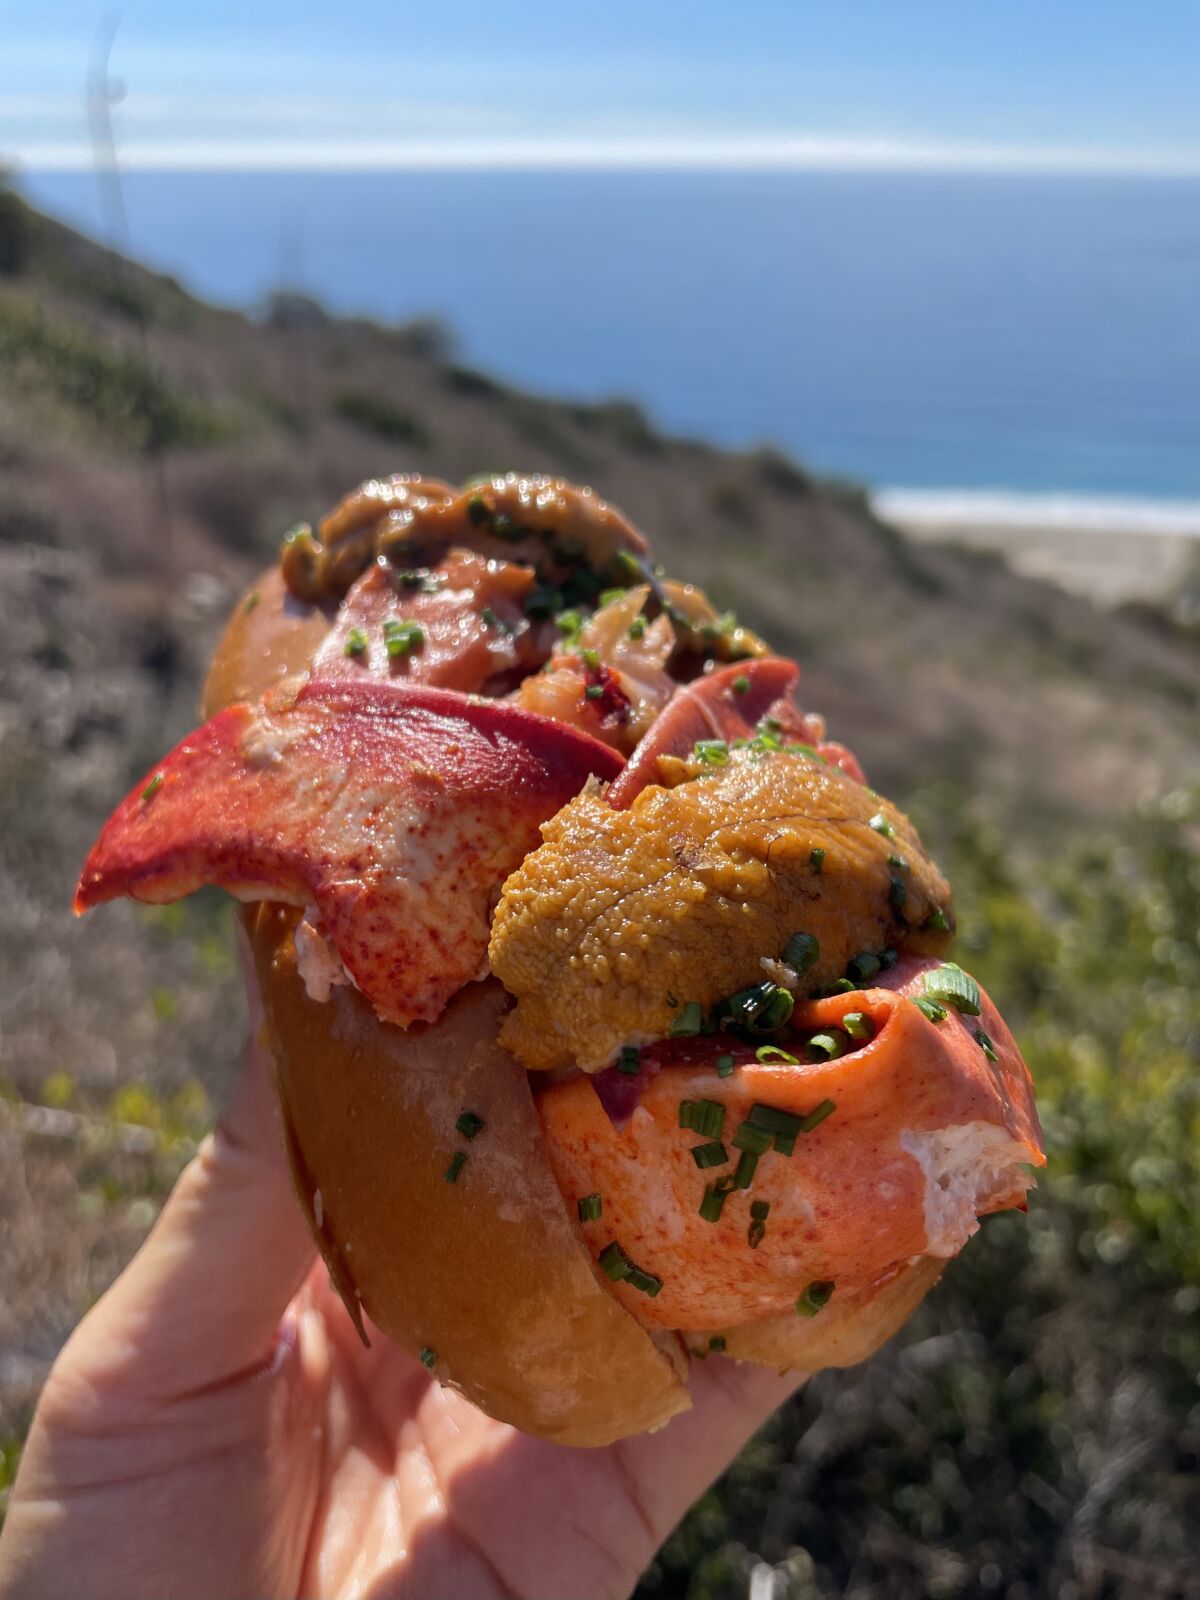 The warm lobster roll with butter from Broad Street Oyster Co. in Malibu is an excellent reward for bagging Mugu Peak.